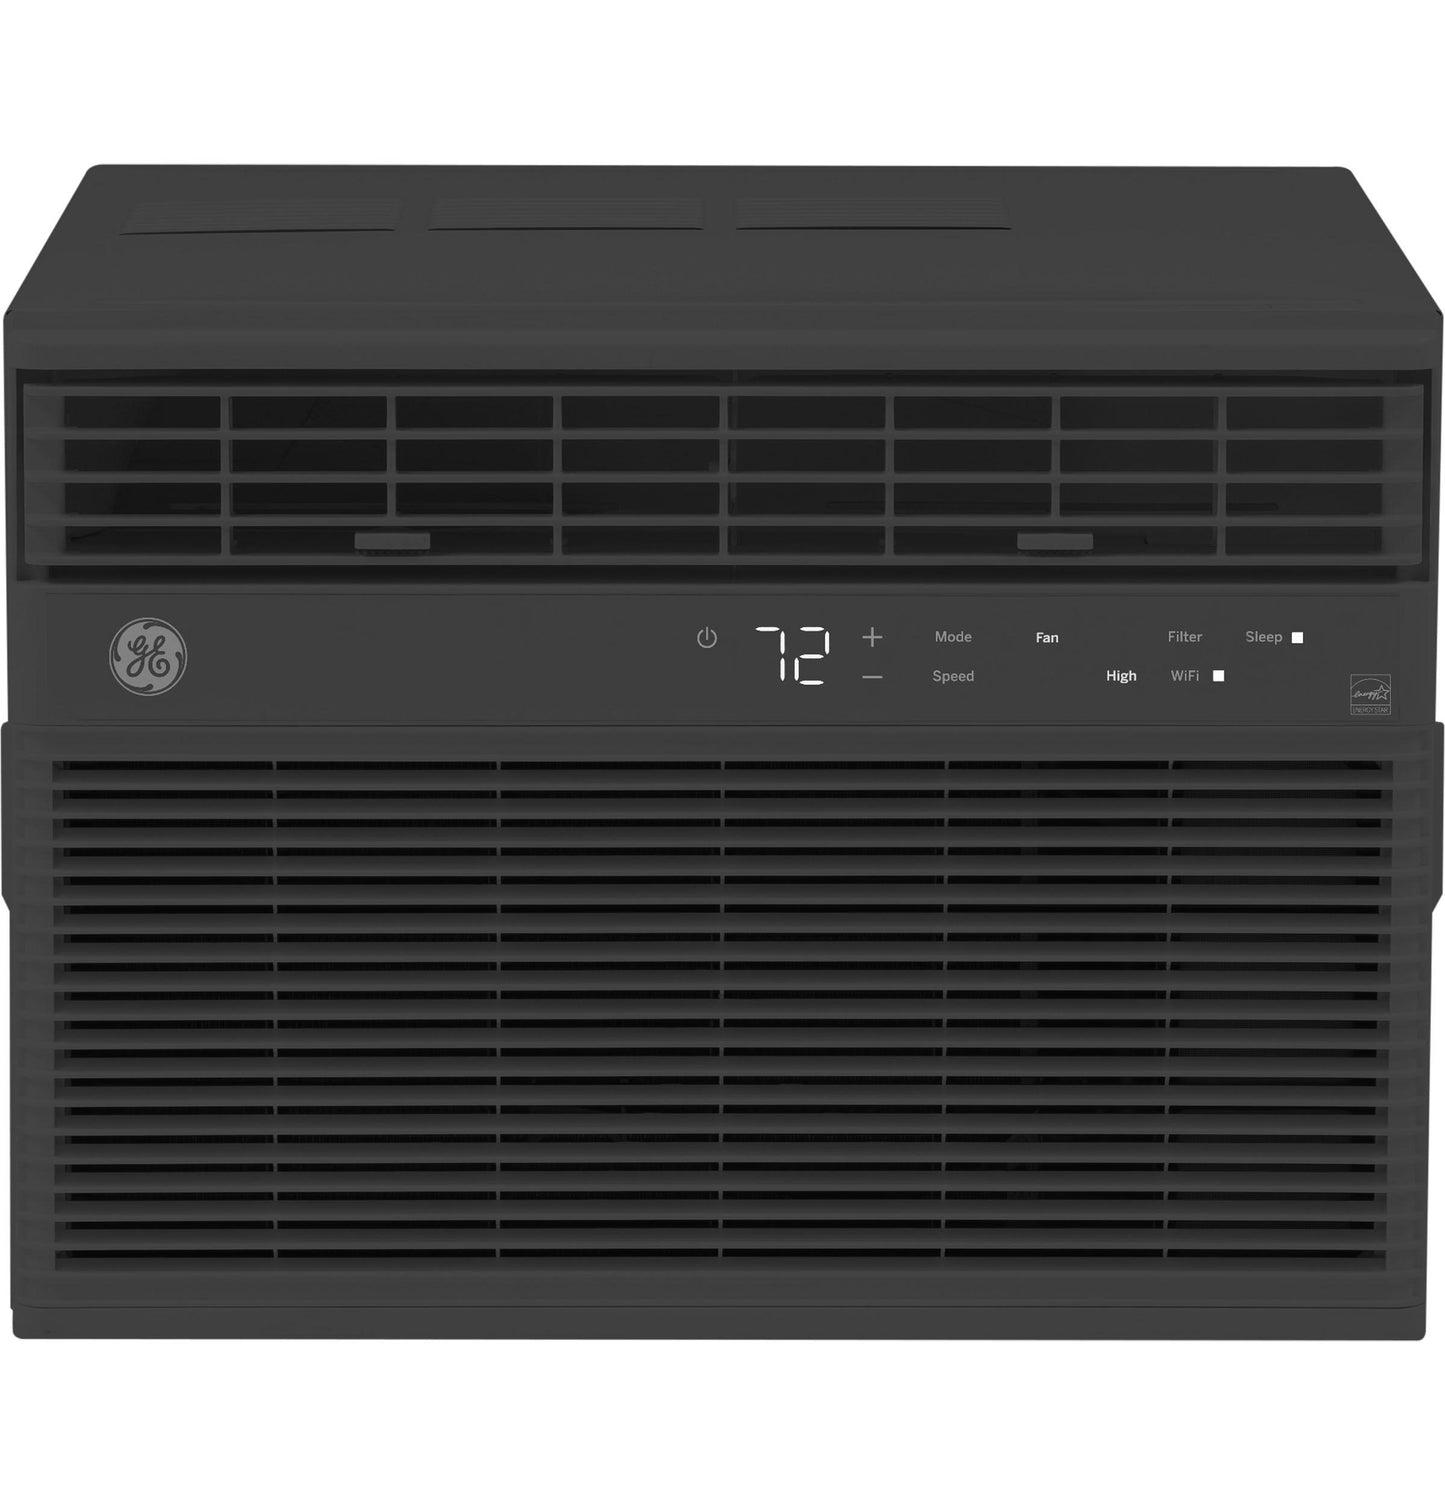 Ge Appliances AHEU08BC Ge® Energy Star® 8,000 Btu Smart Electronic Window Air Conditioner For Medium Rooms Up To 350 Sq. Ft., Black